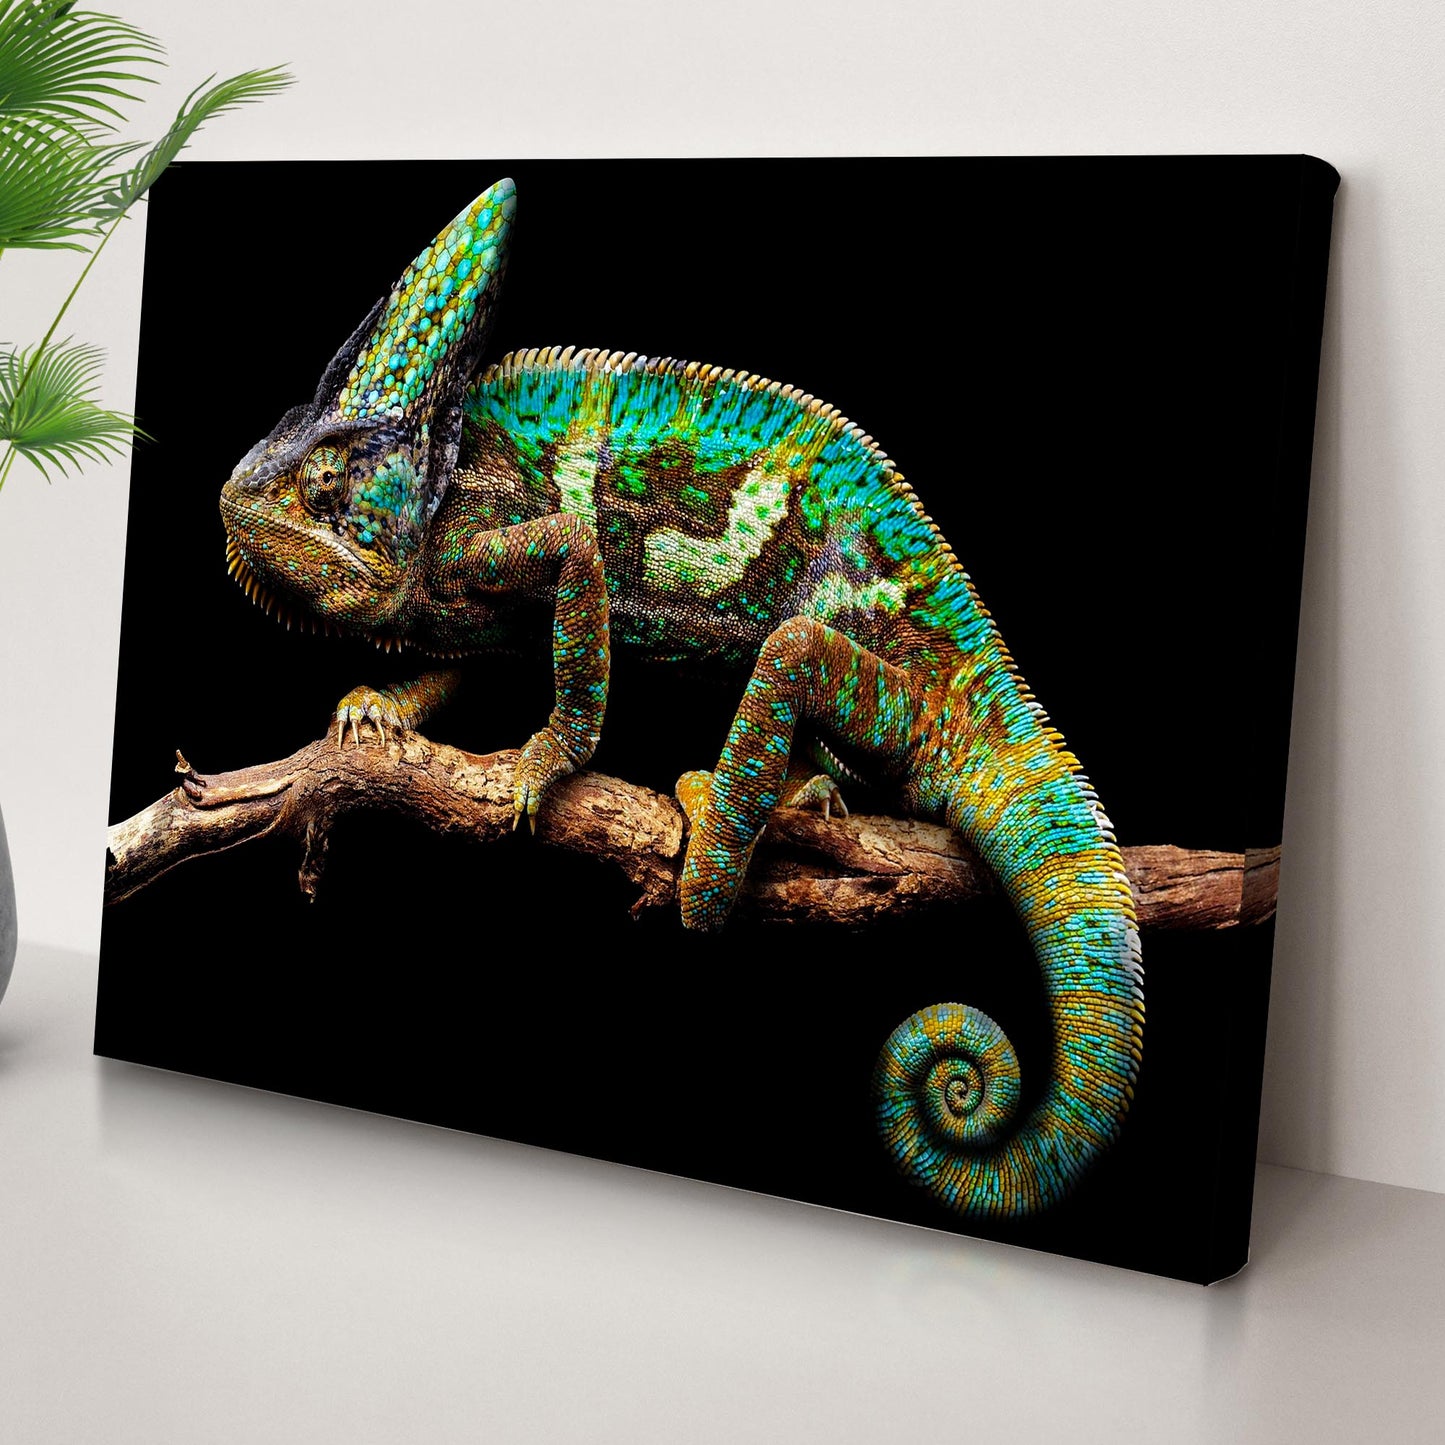 Reptile Lizard Veiled Chameleon Canvas Wall Art Style 2 - by Tailored Canvases